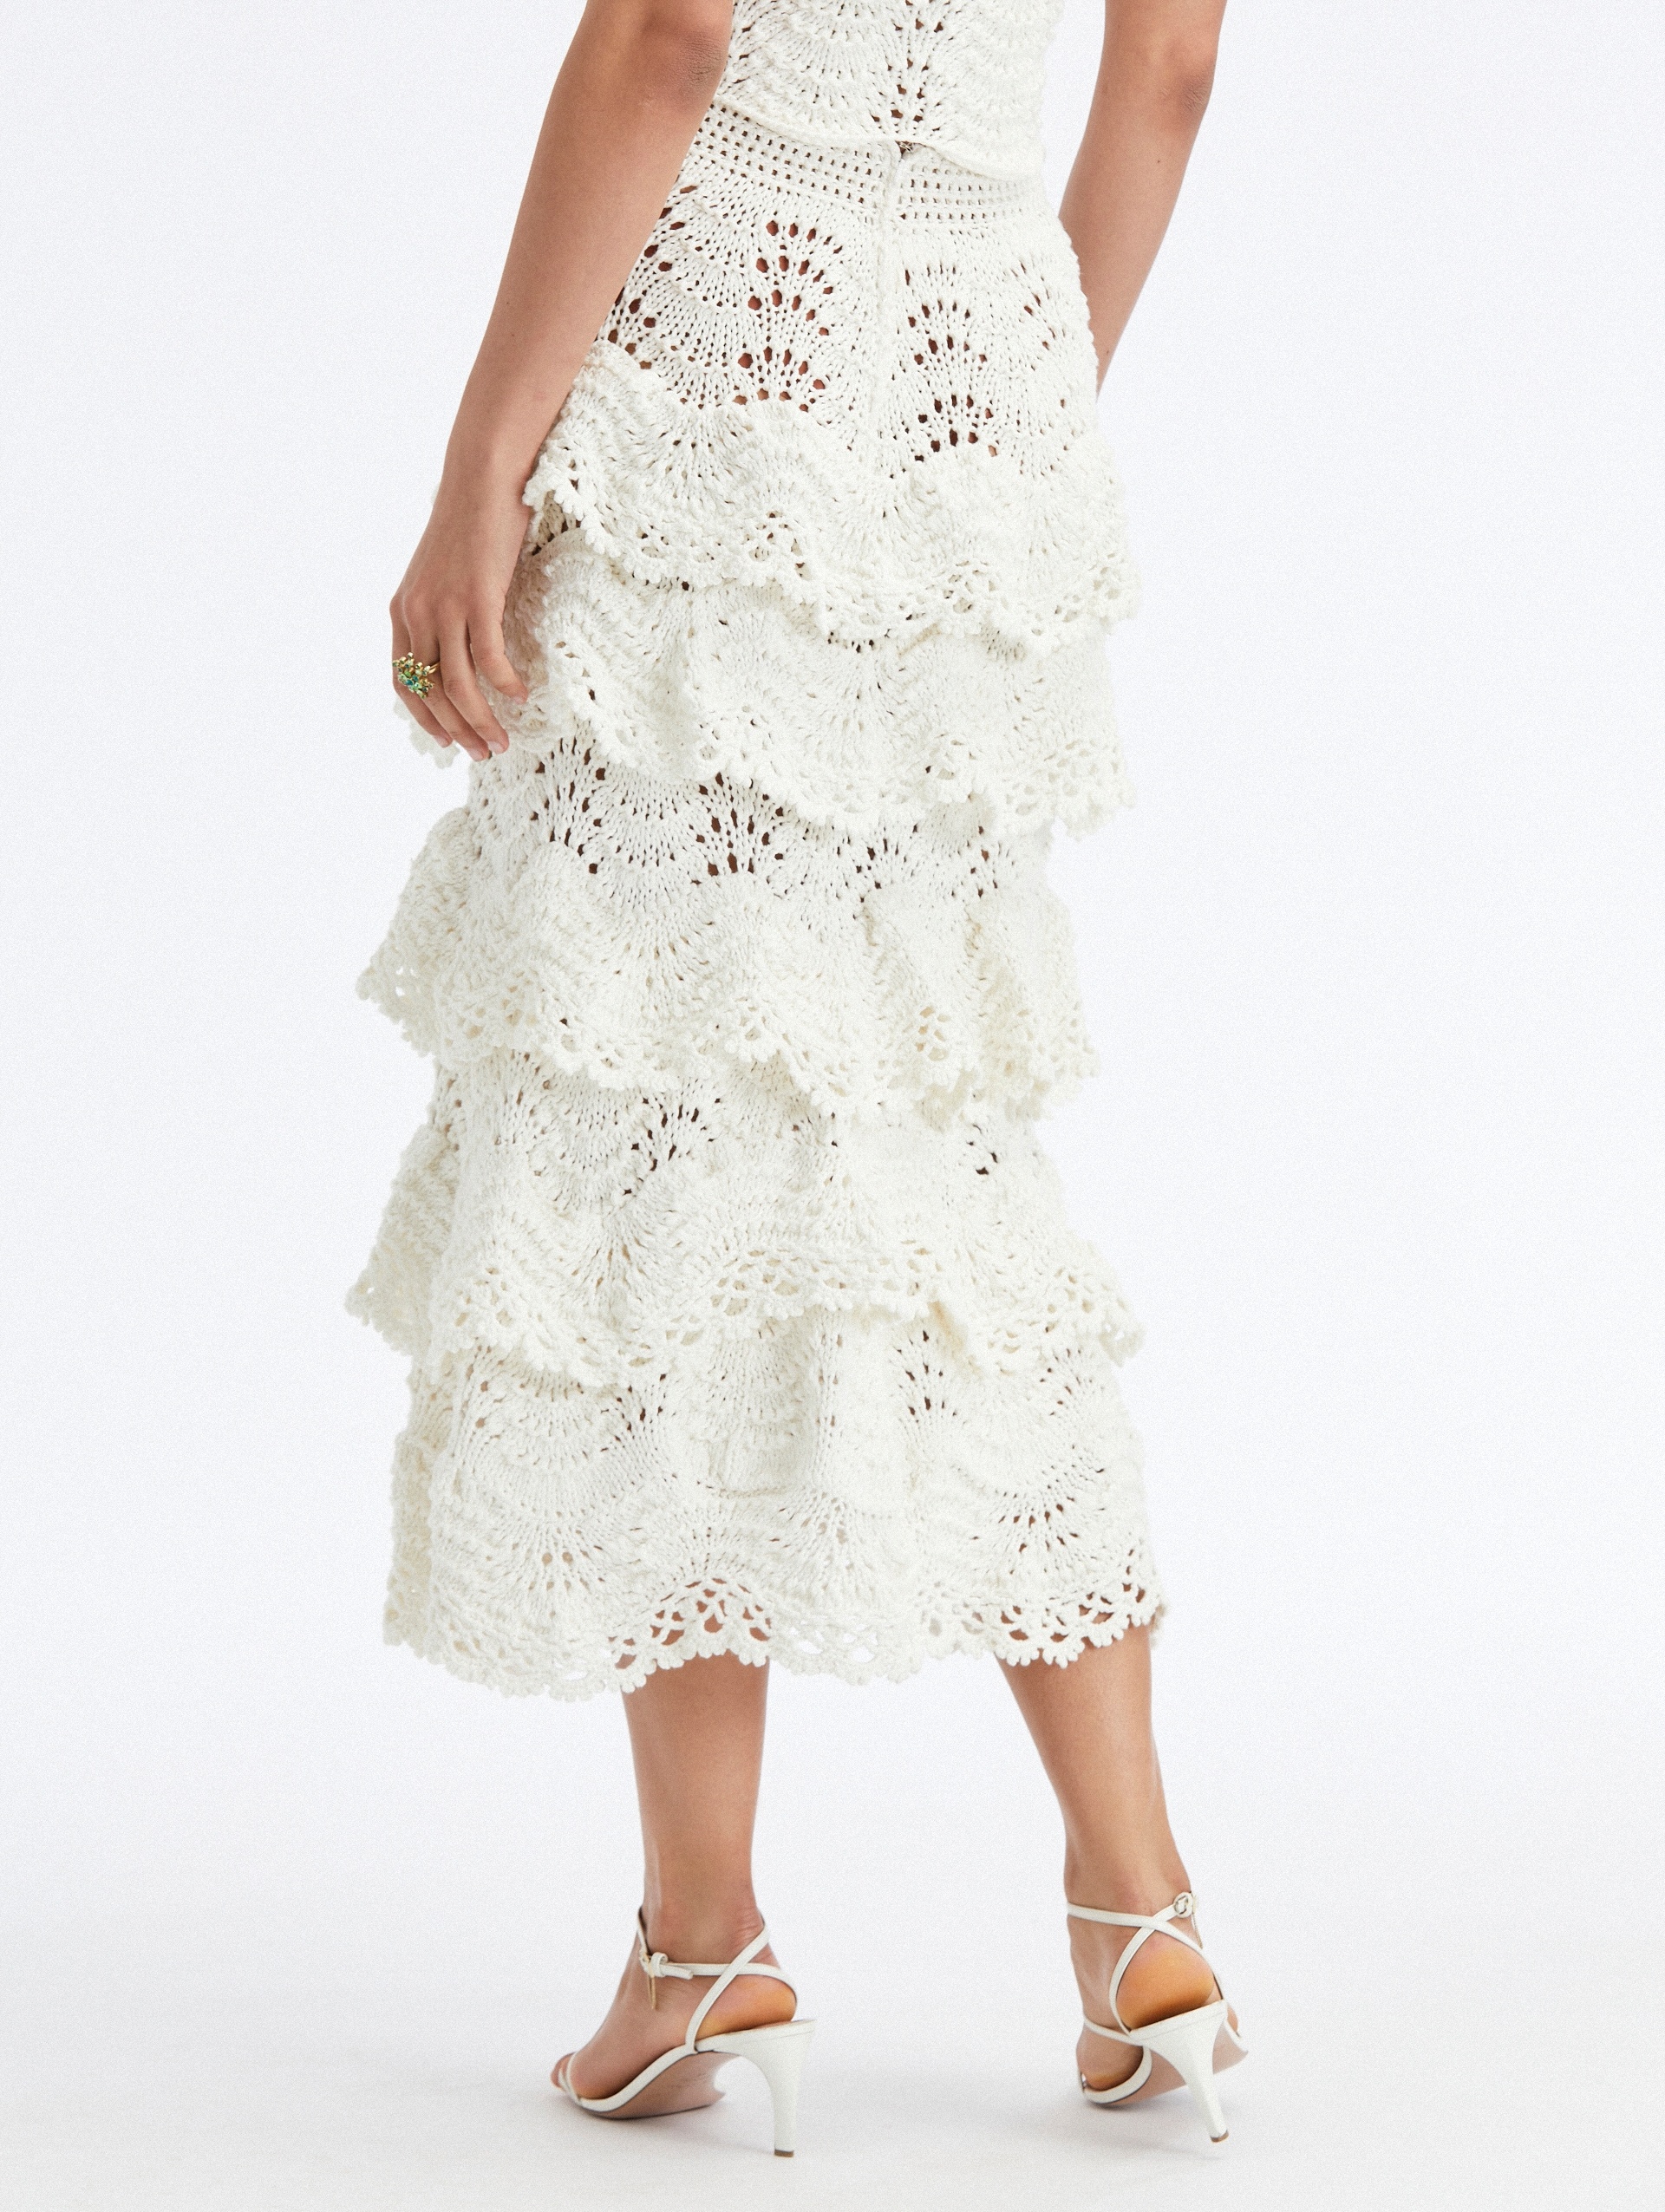 HAND CROCHETED SCALLOP TIERED SKIRT - 2